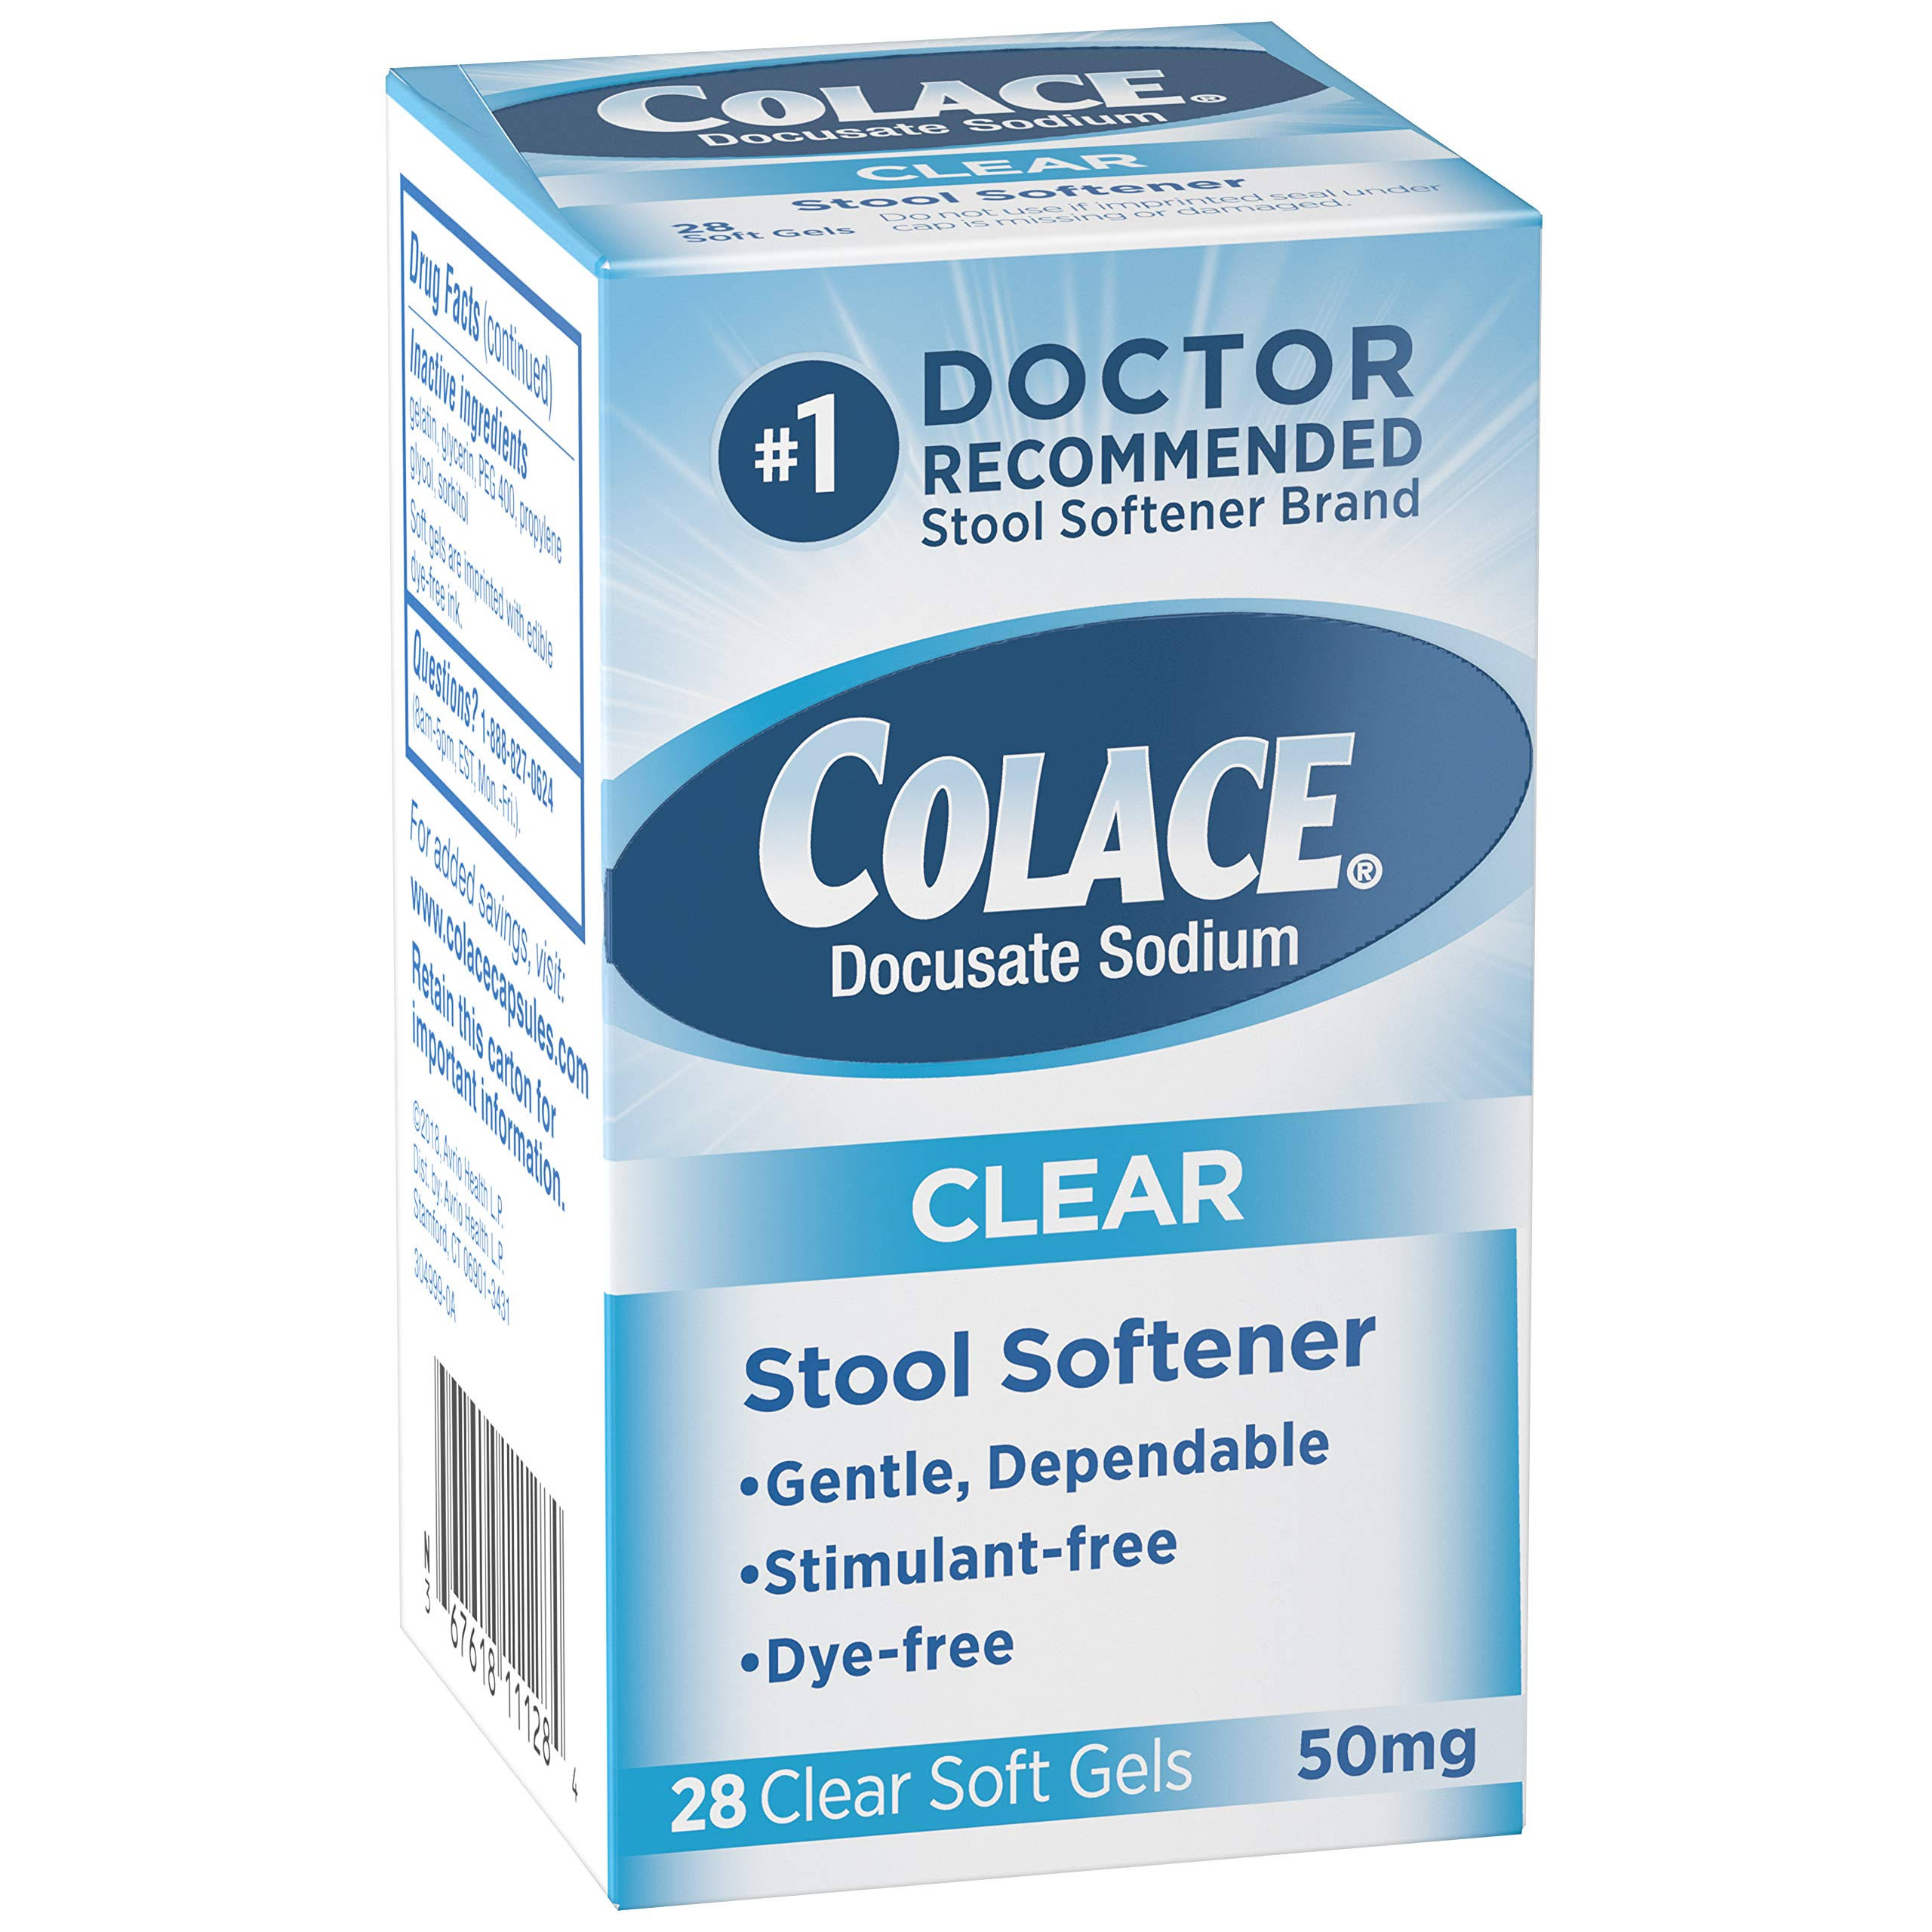 Colace Clear Docusate Sodium Stool Softener 50mg, 28 Count Per Box (2 Pack)